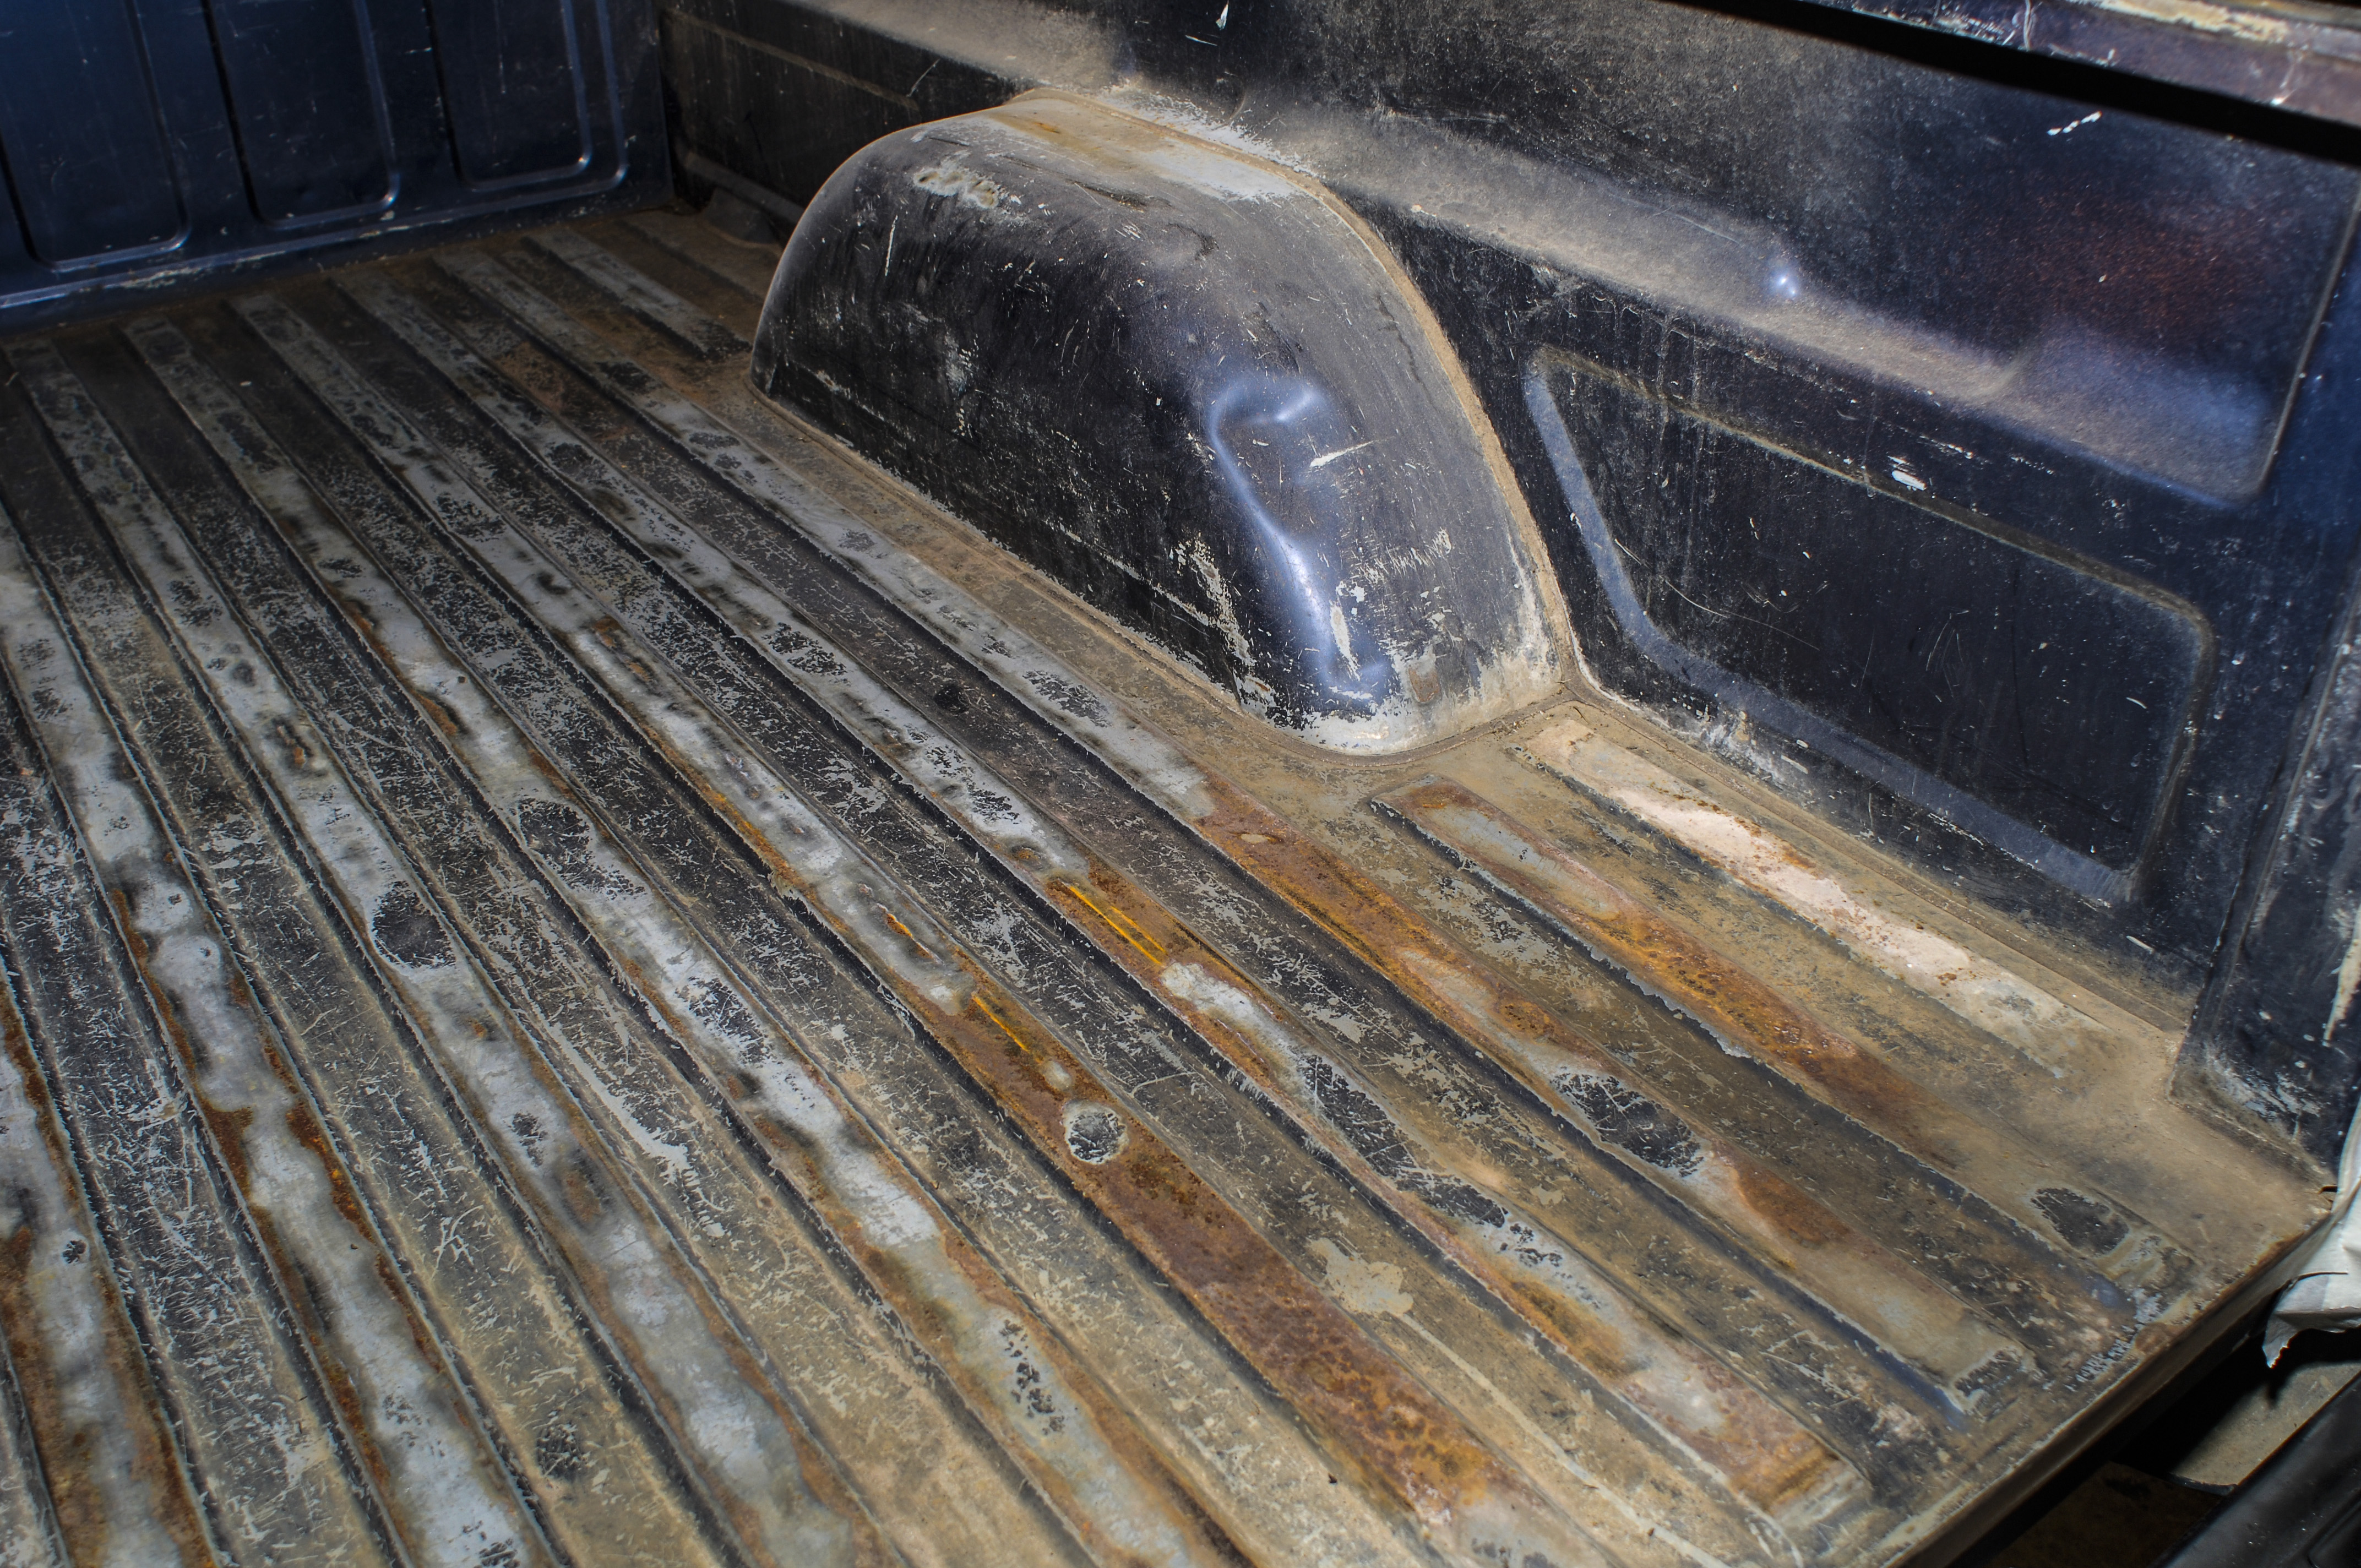 How Much Does a Truck Bedliner Cost?